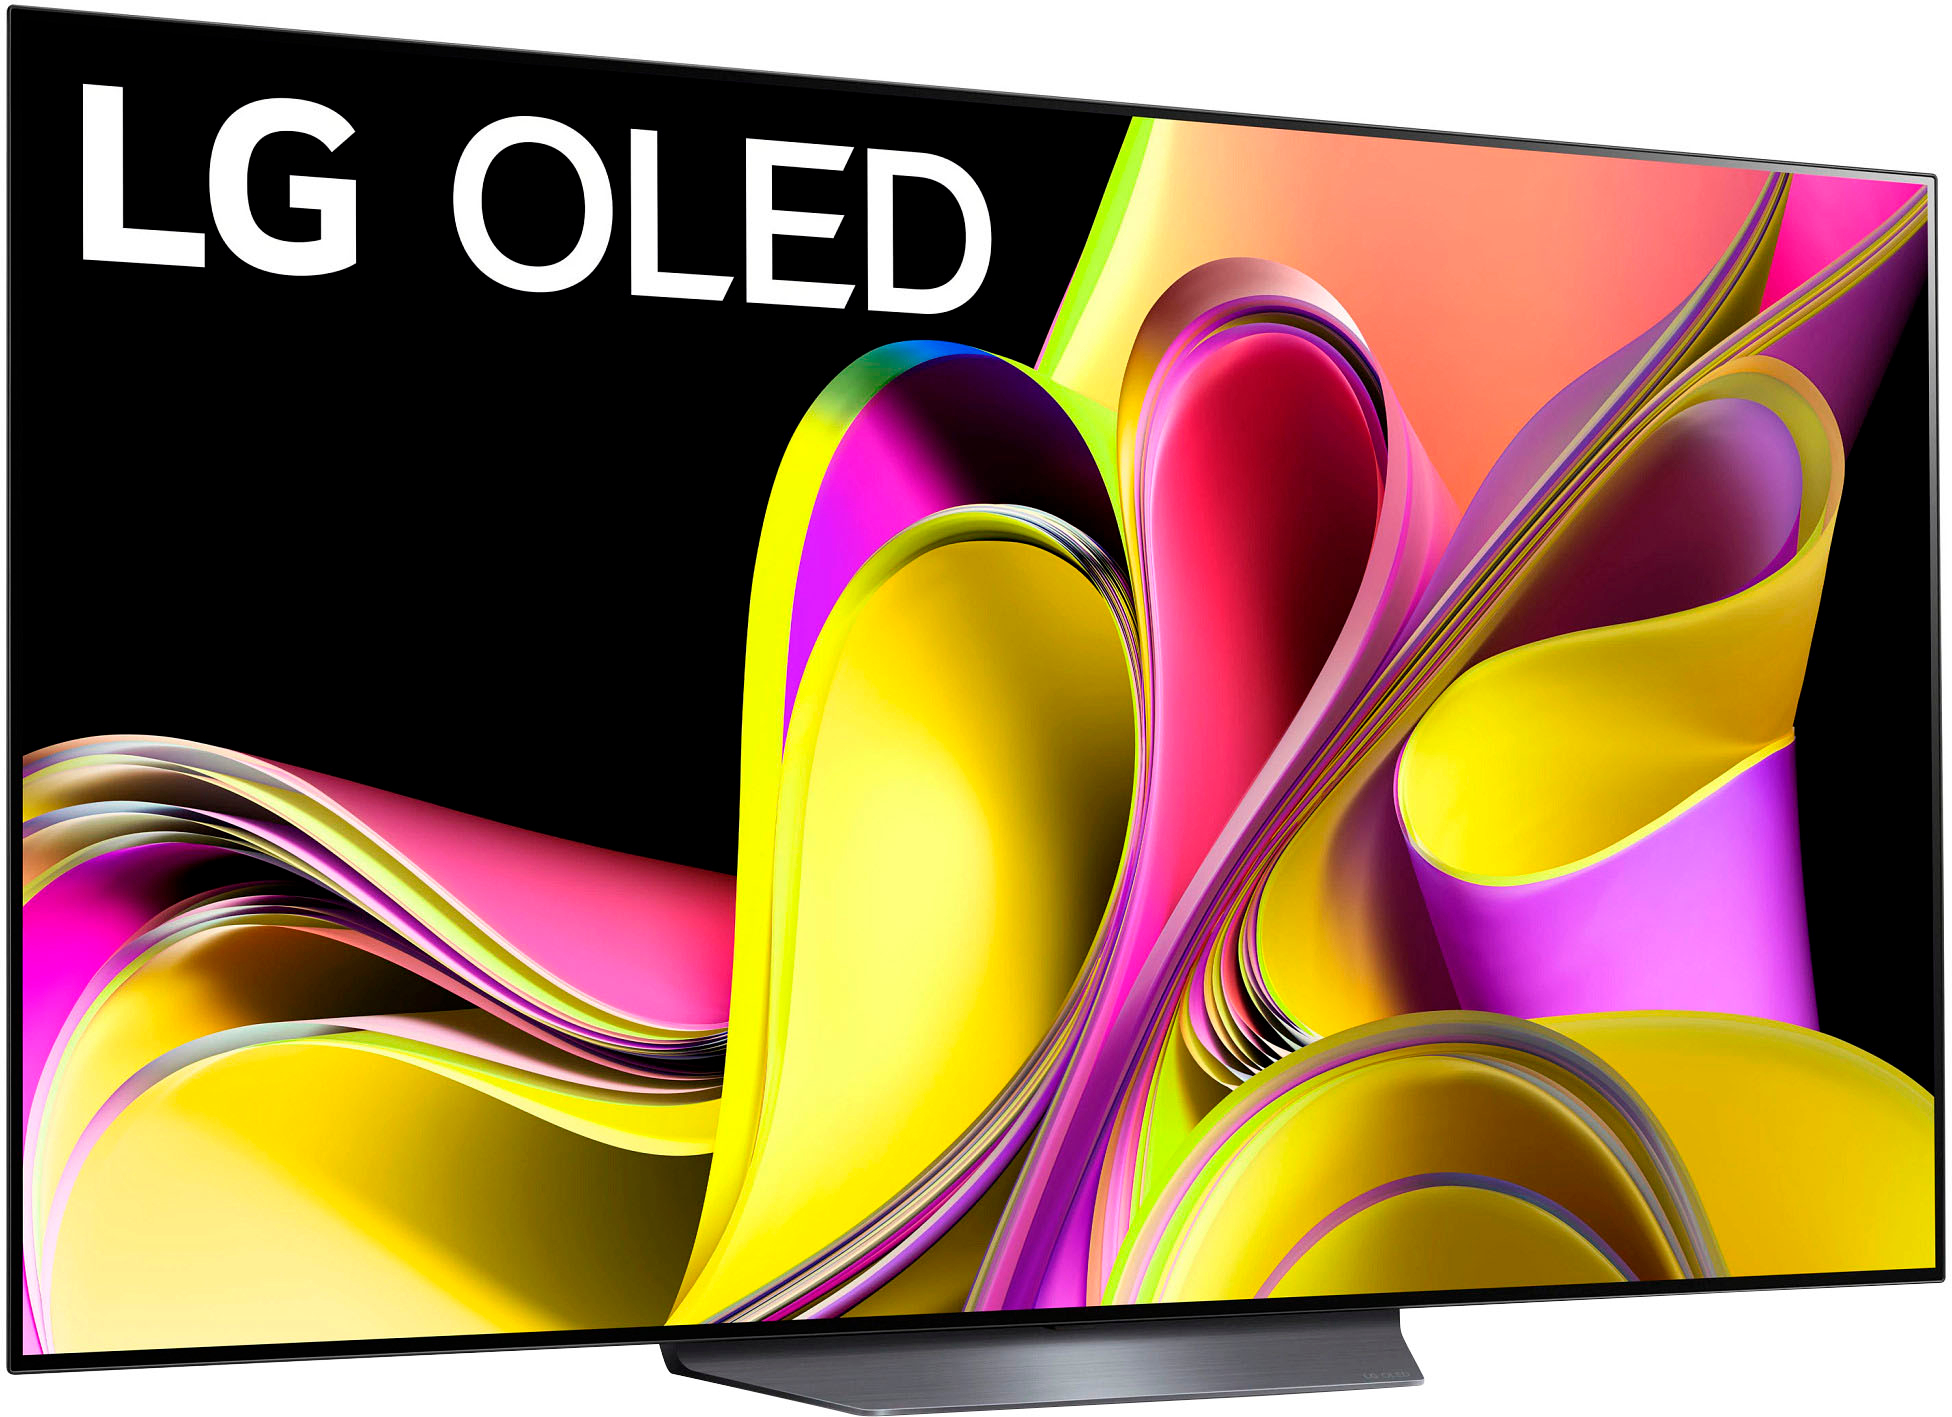 Vizio OLED 4K TV Review: great picture, great price - Reviewed